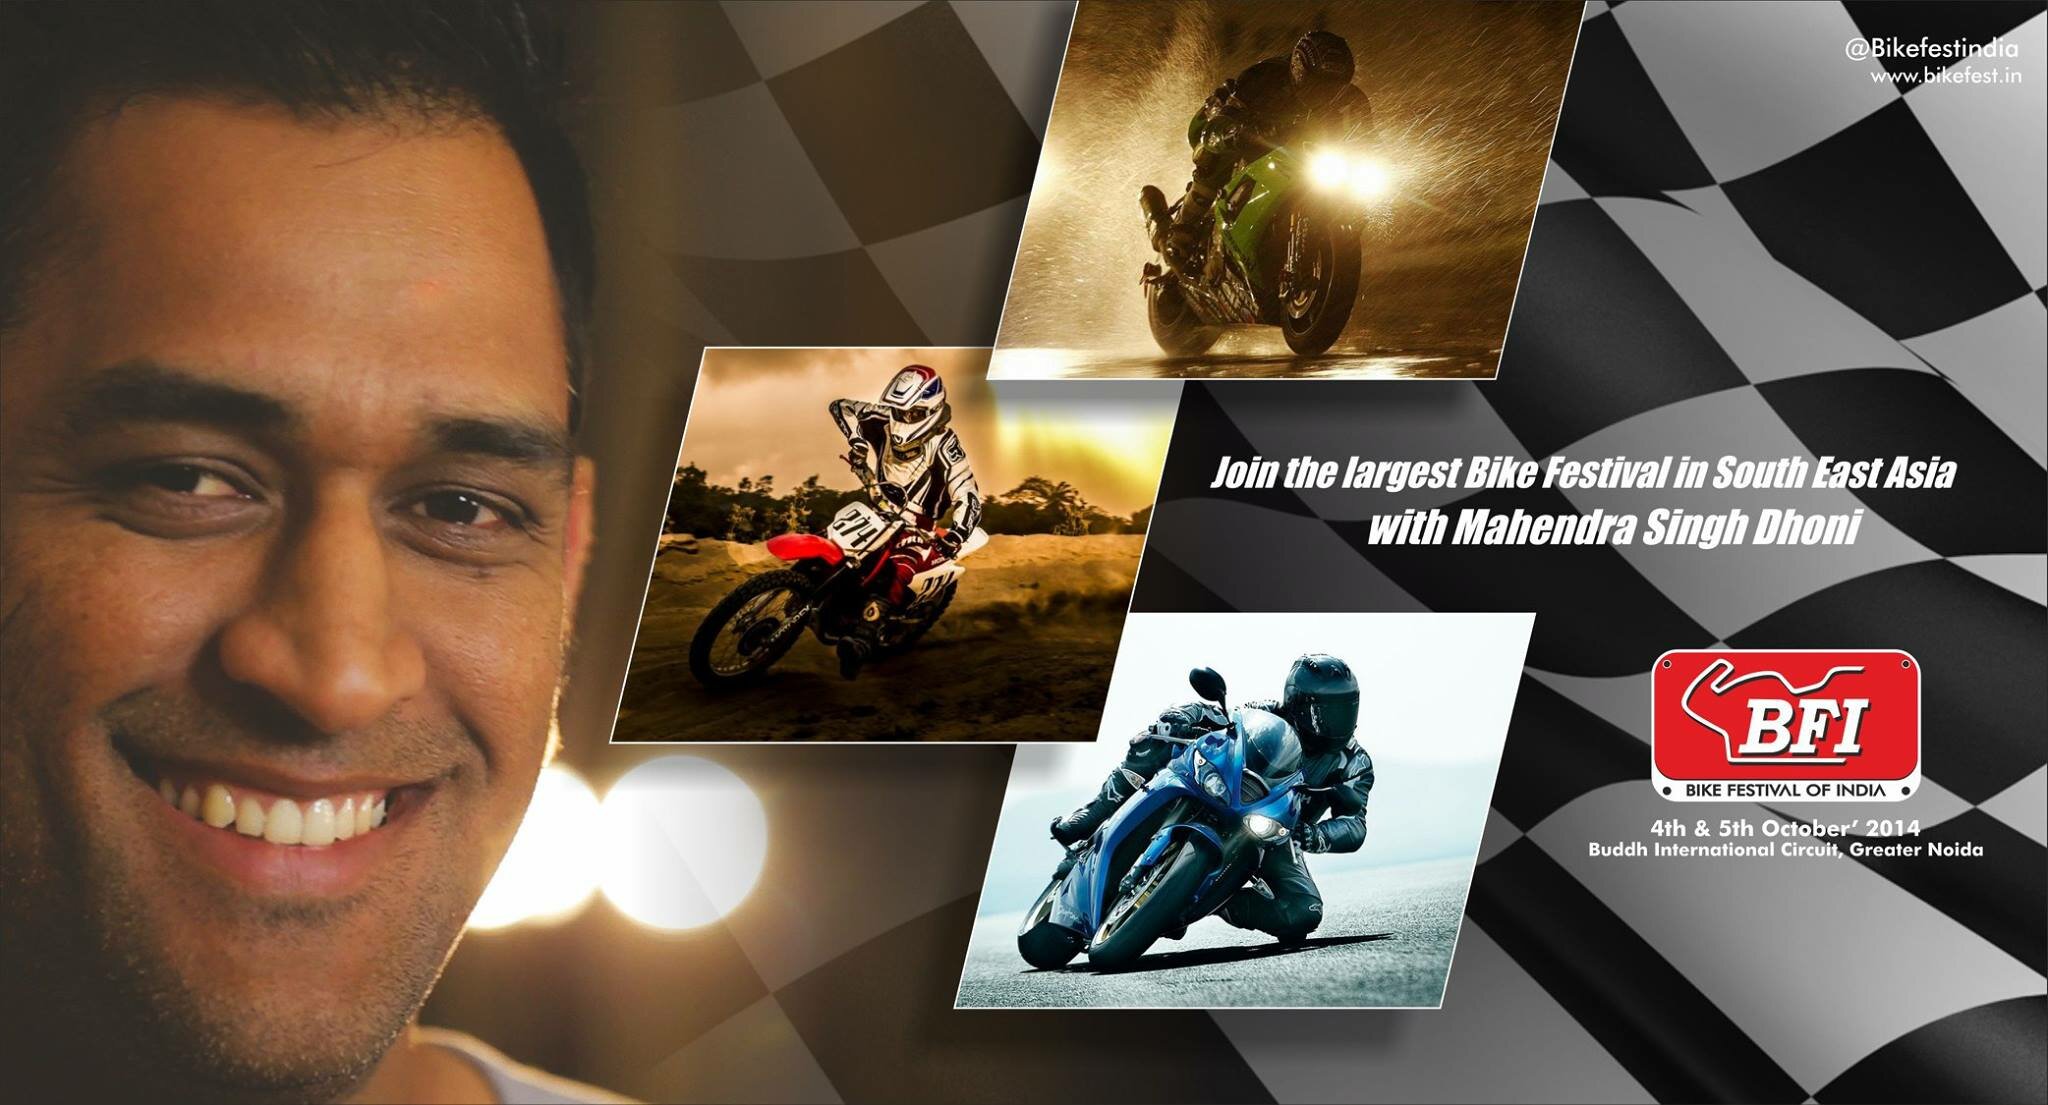 Ride with Dhoni at the Bike Festival of India